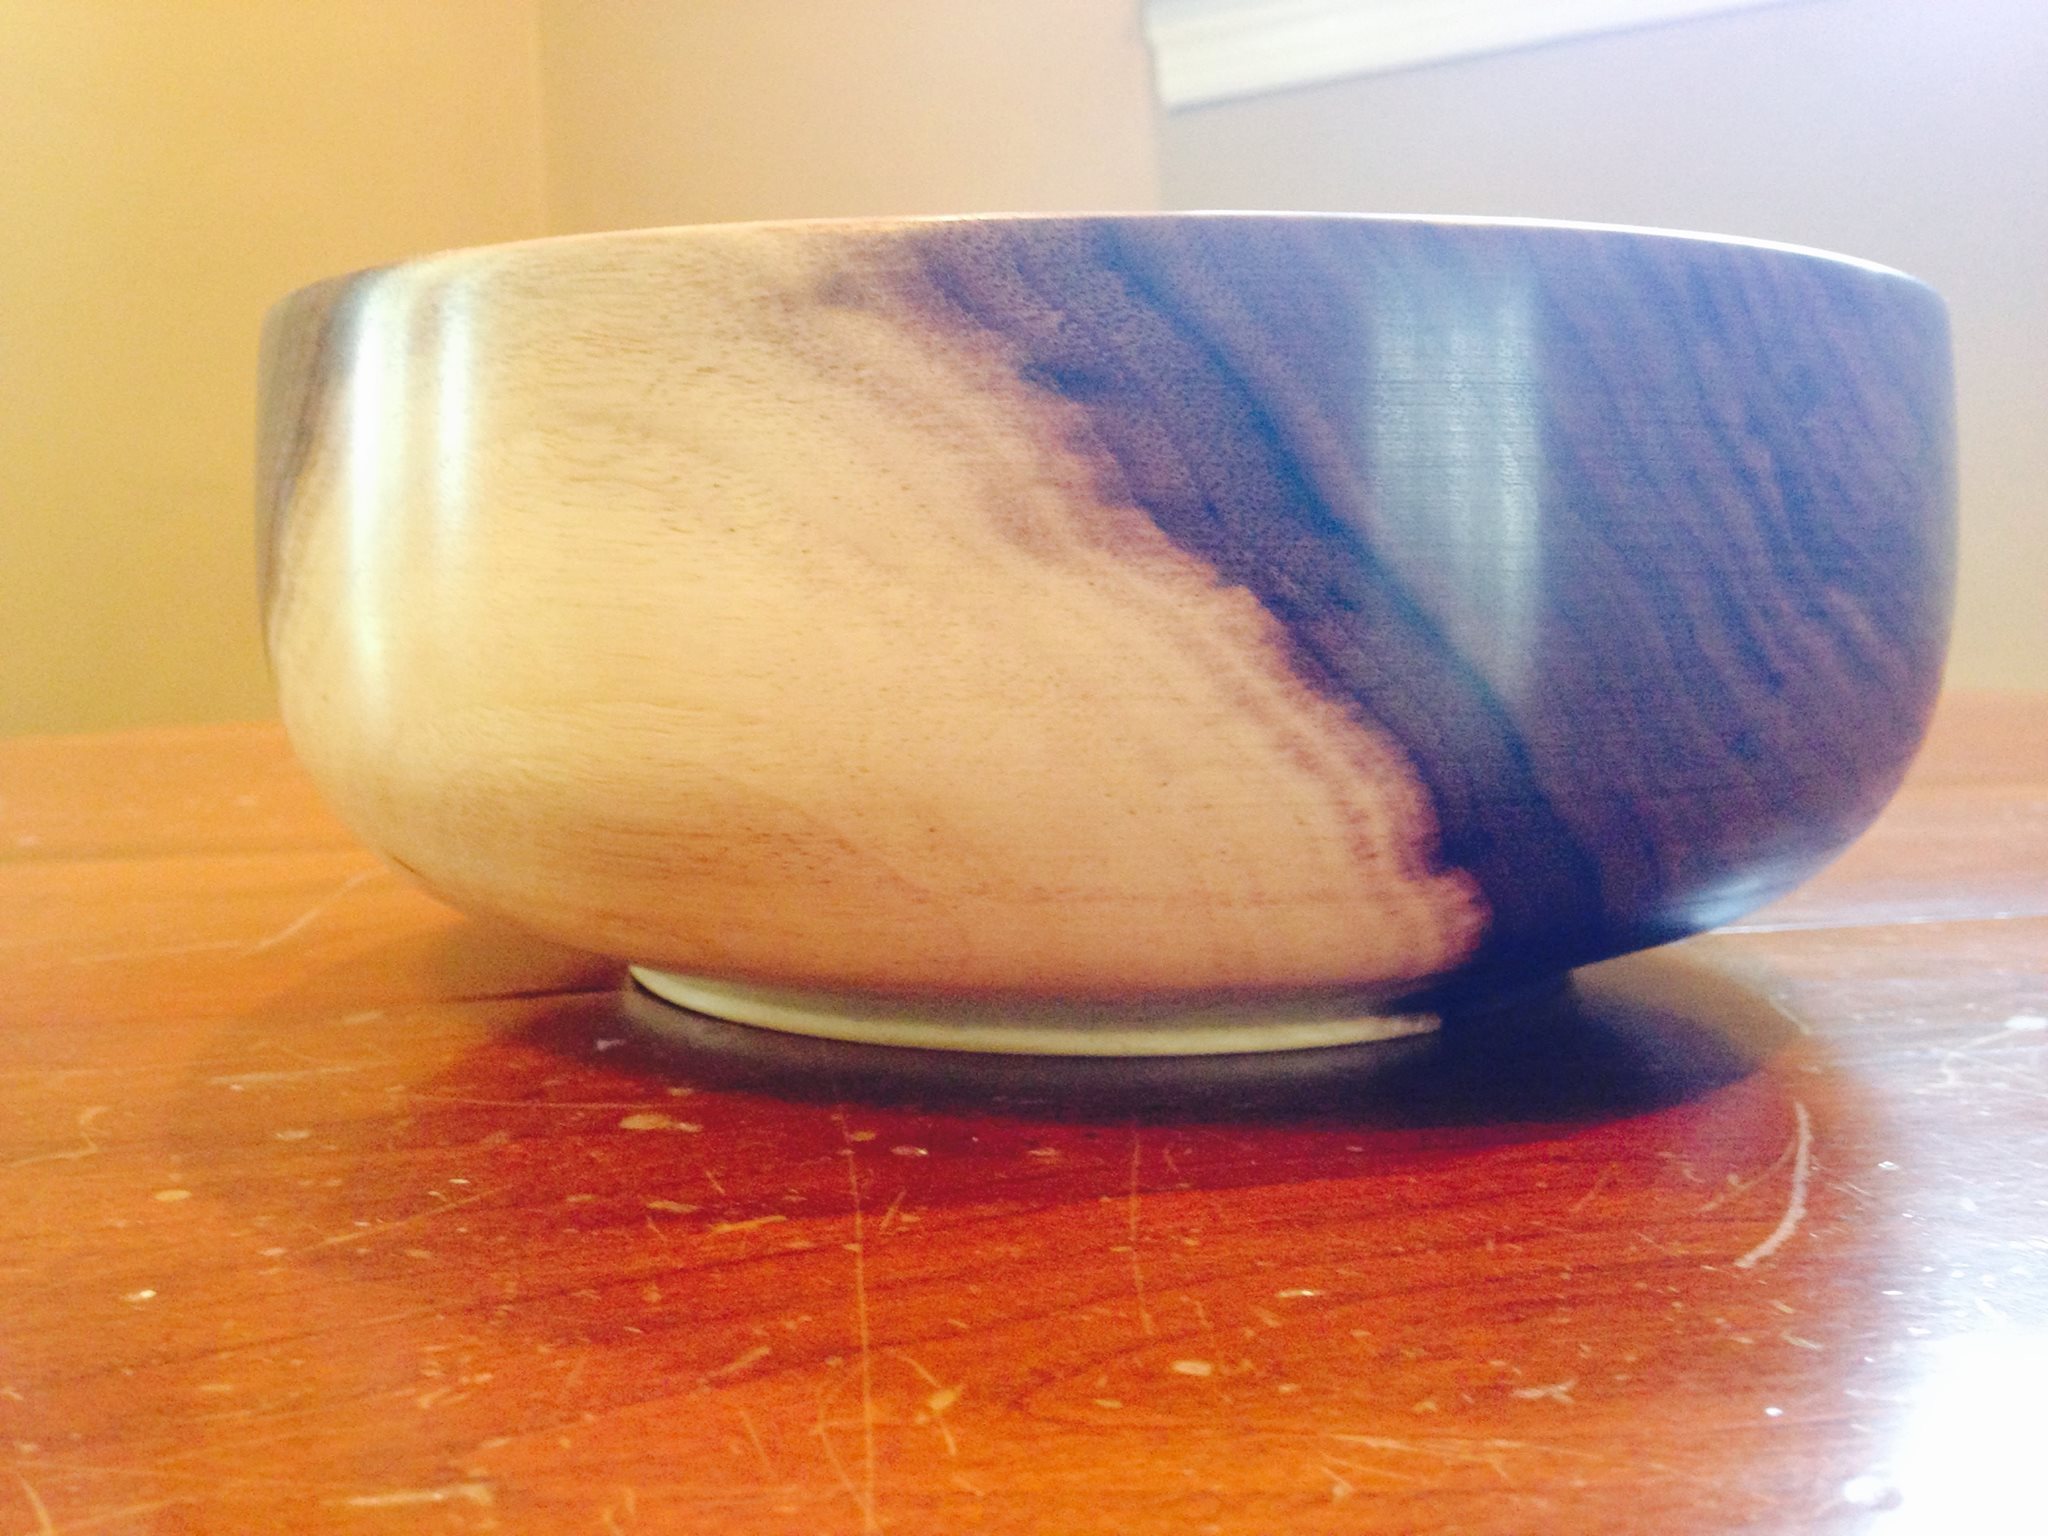 After your bowl has dried, you can remount, and finish turn. You're not taking much wood off at this stage, just getting rid of the bend and warping. Then you sand it from 100-1500 grit and finish. Here I used walnut oil and beeswax.